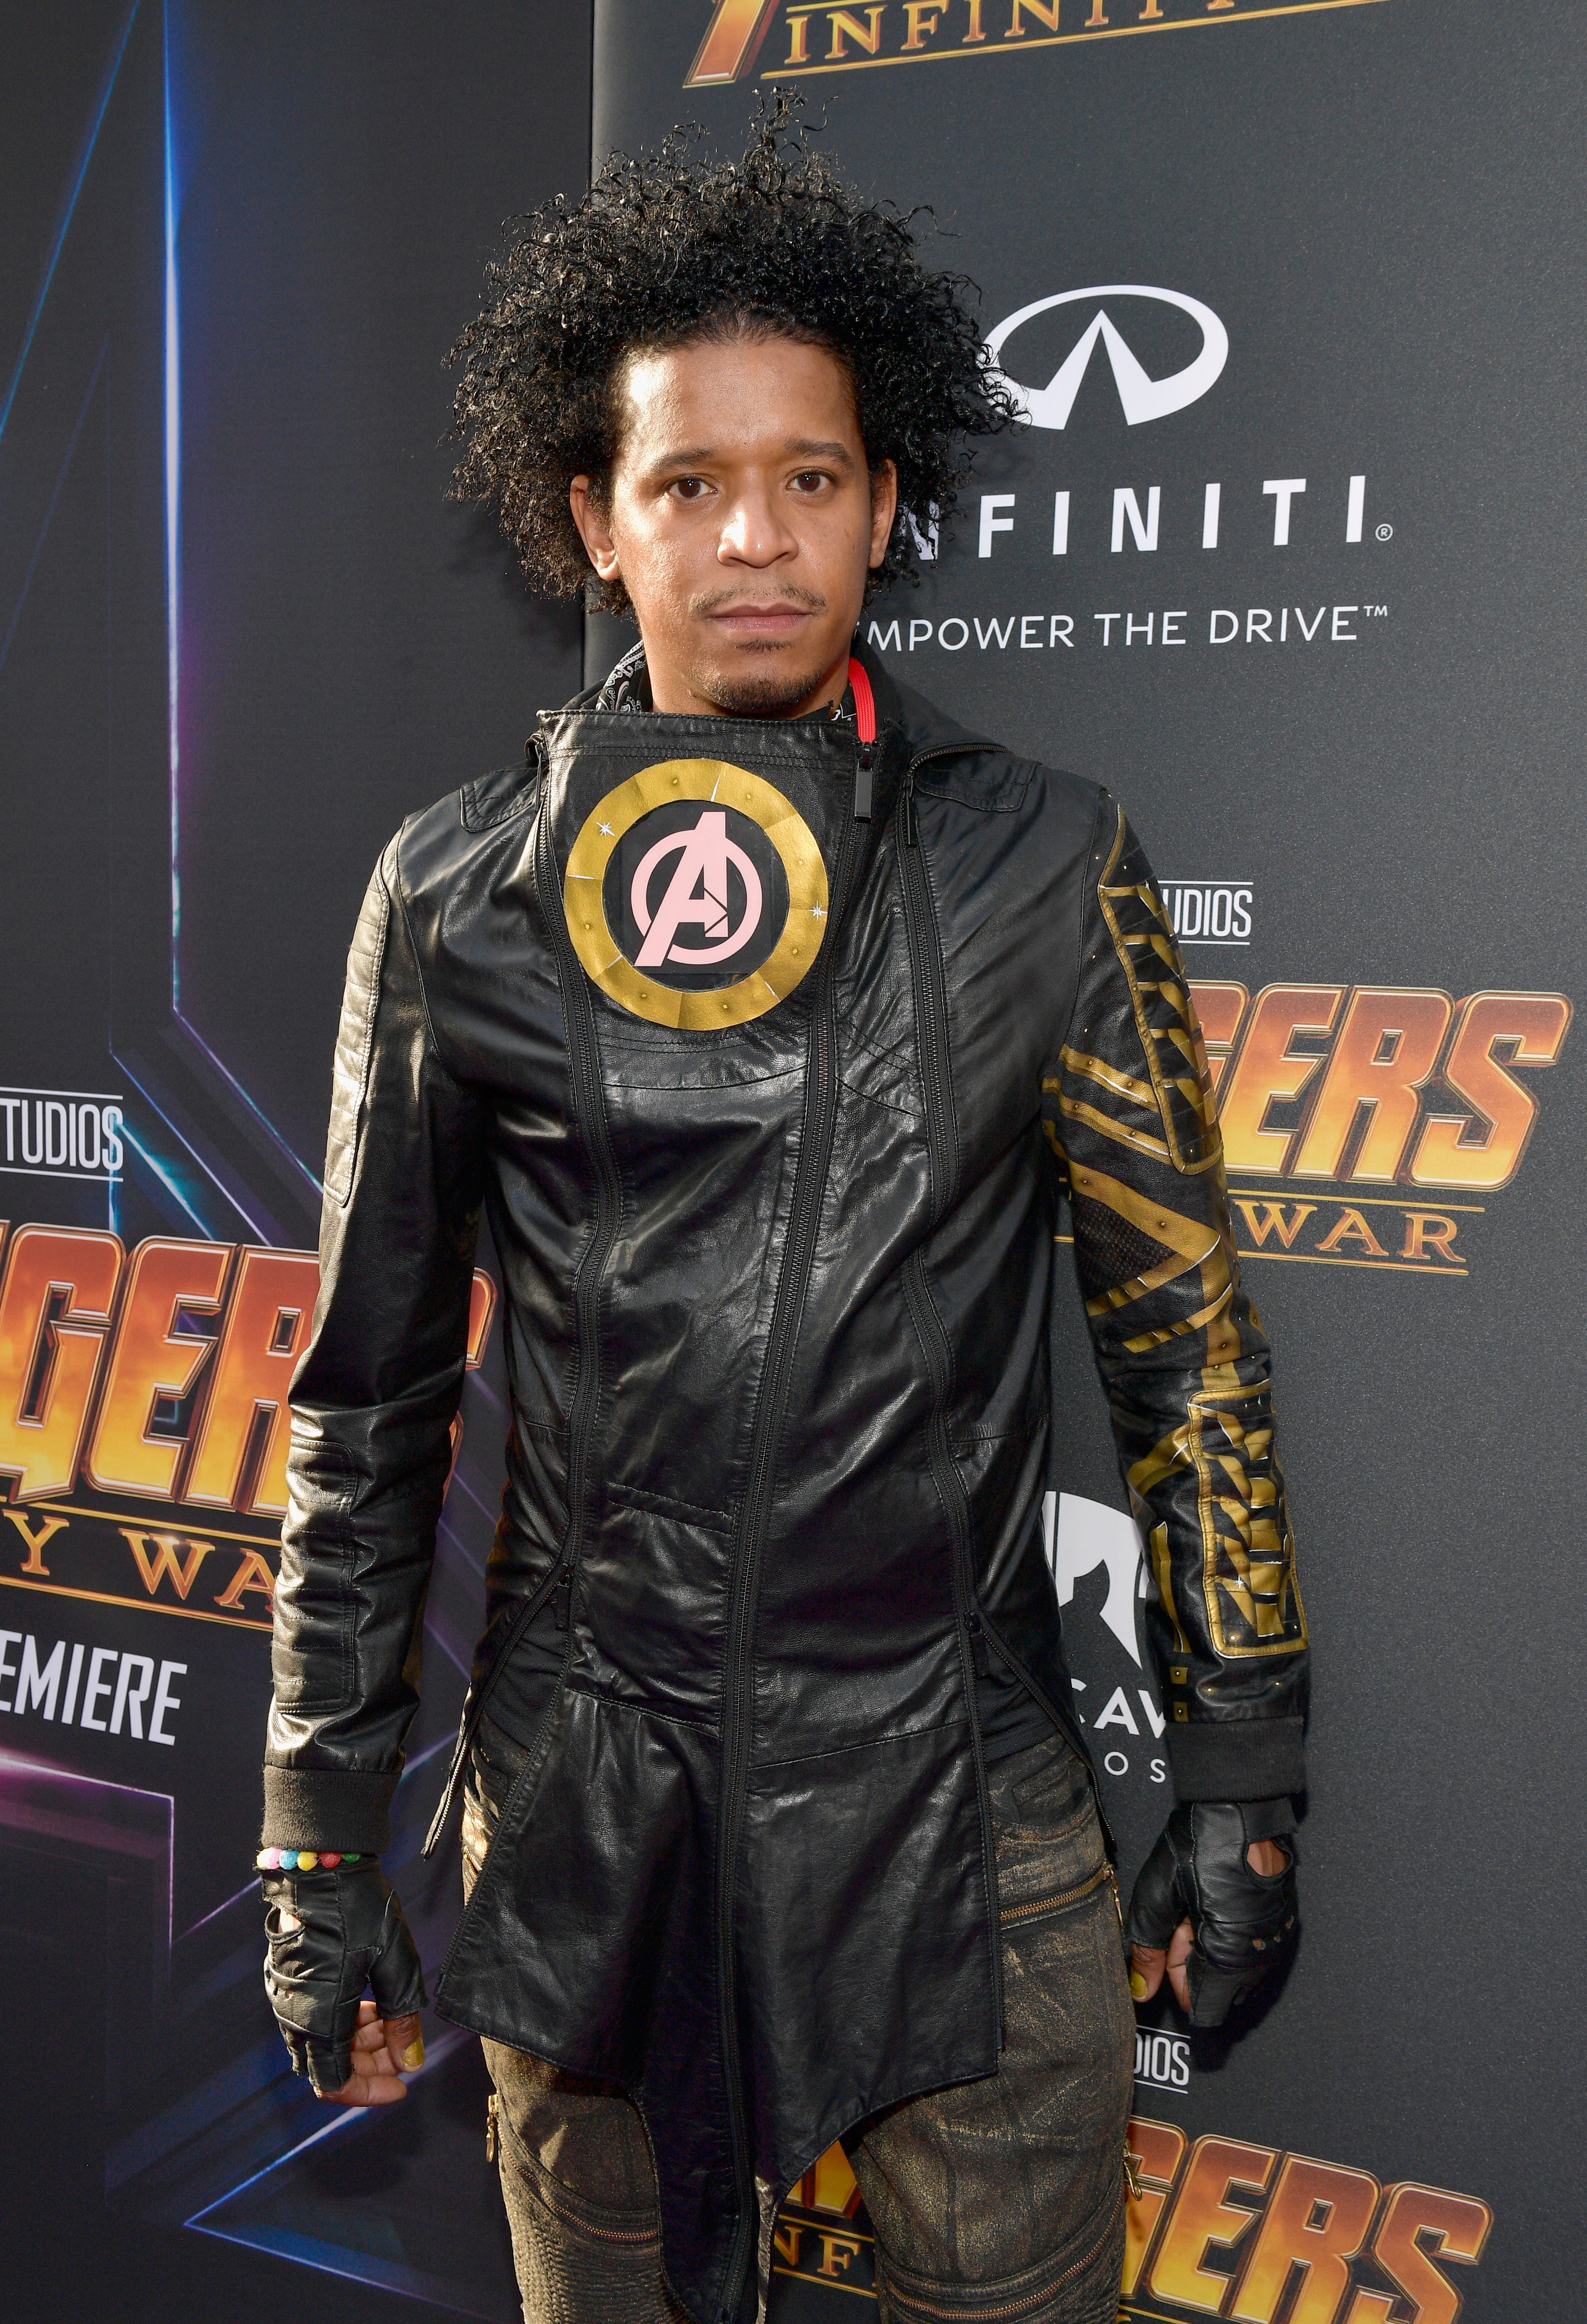 Wakanda Forever! #BlackExcellence Was All Over The 'Avengers' Red Carpet 
